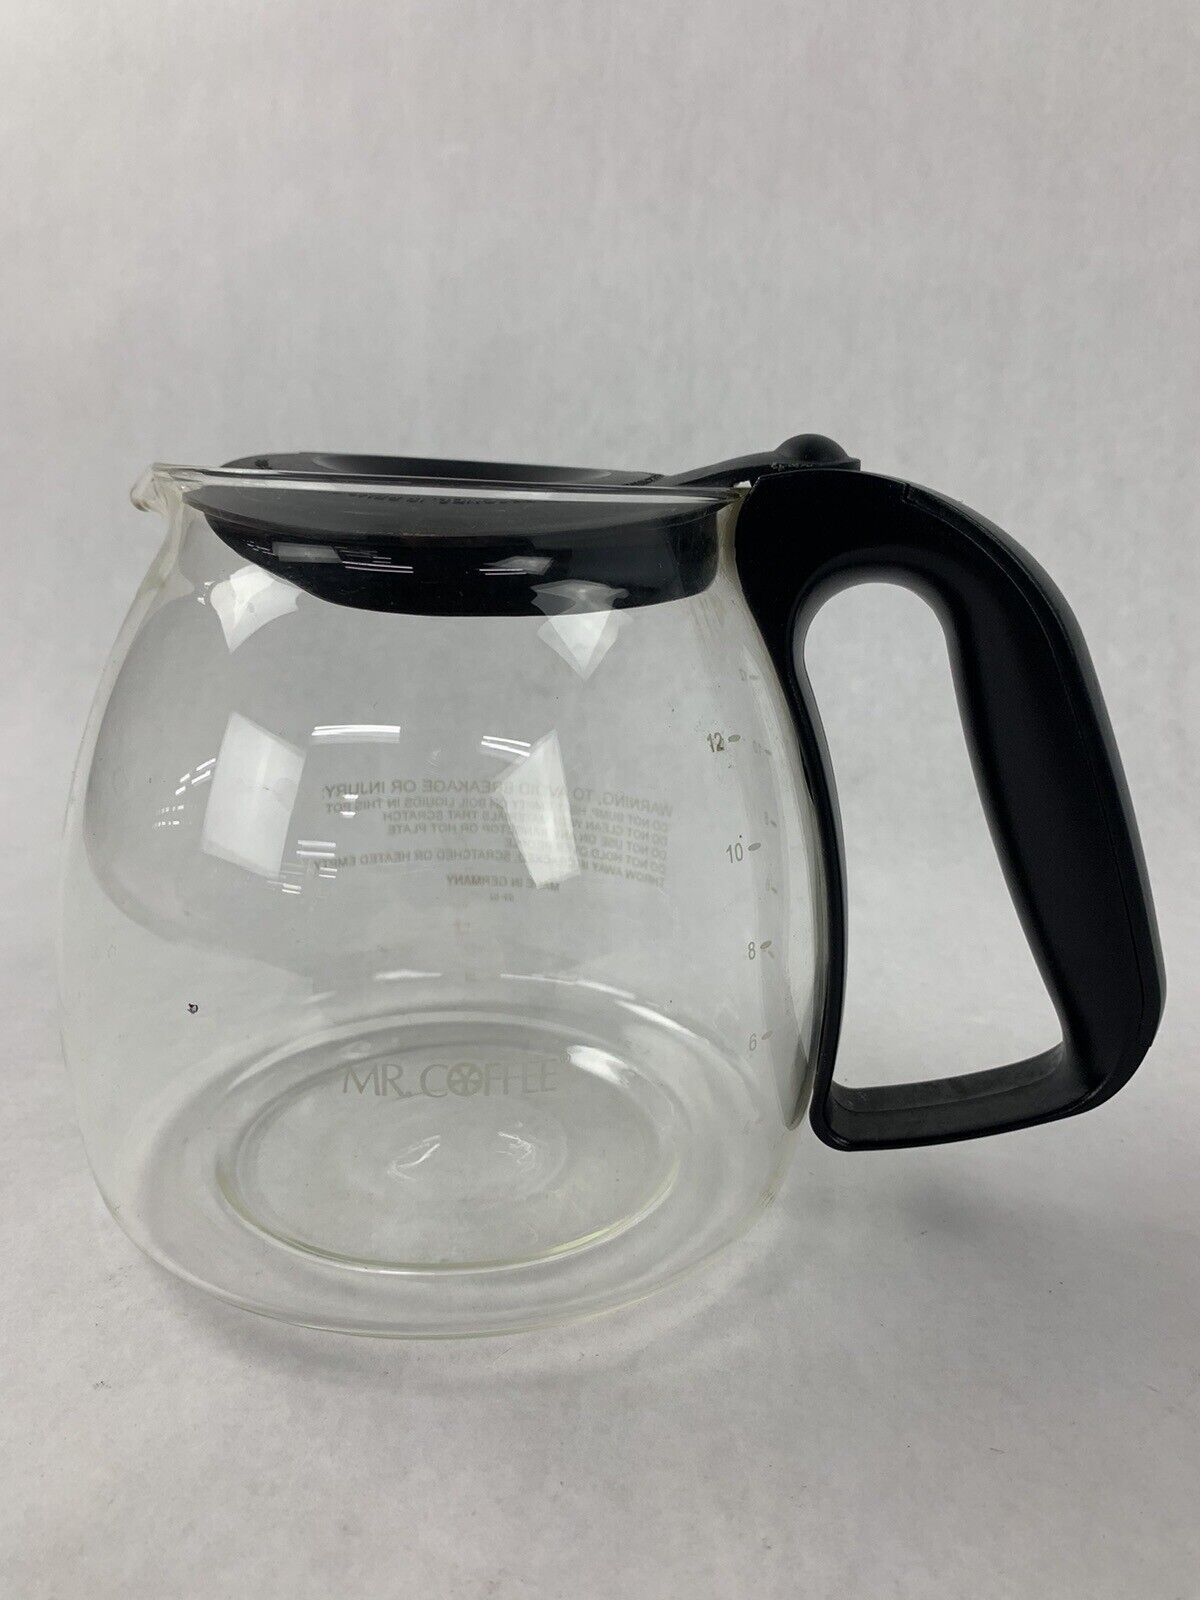  Replacement Coffee Carafe for Black and Decker 12-CUP